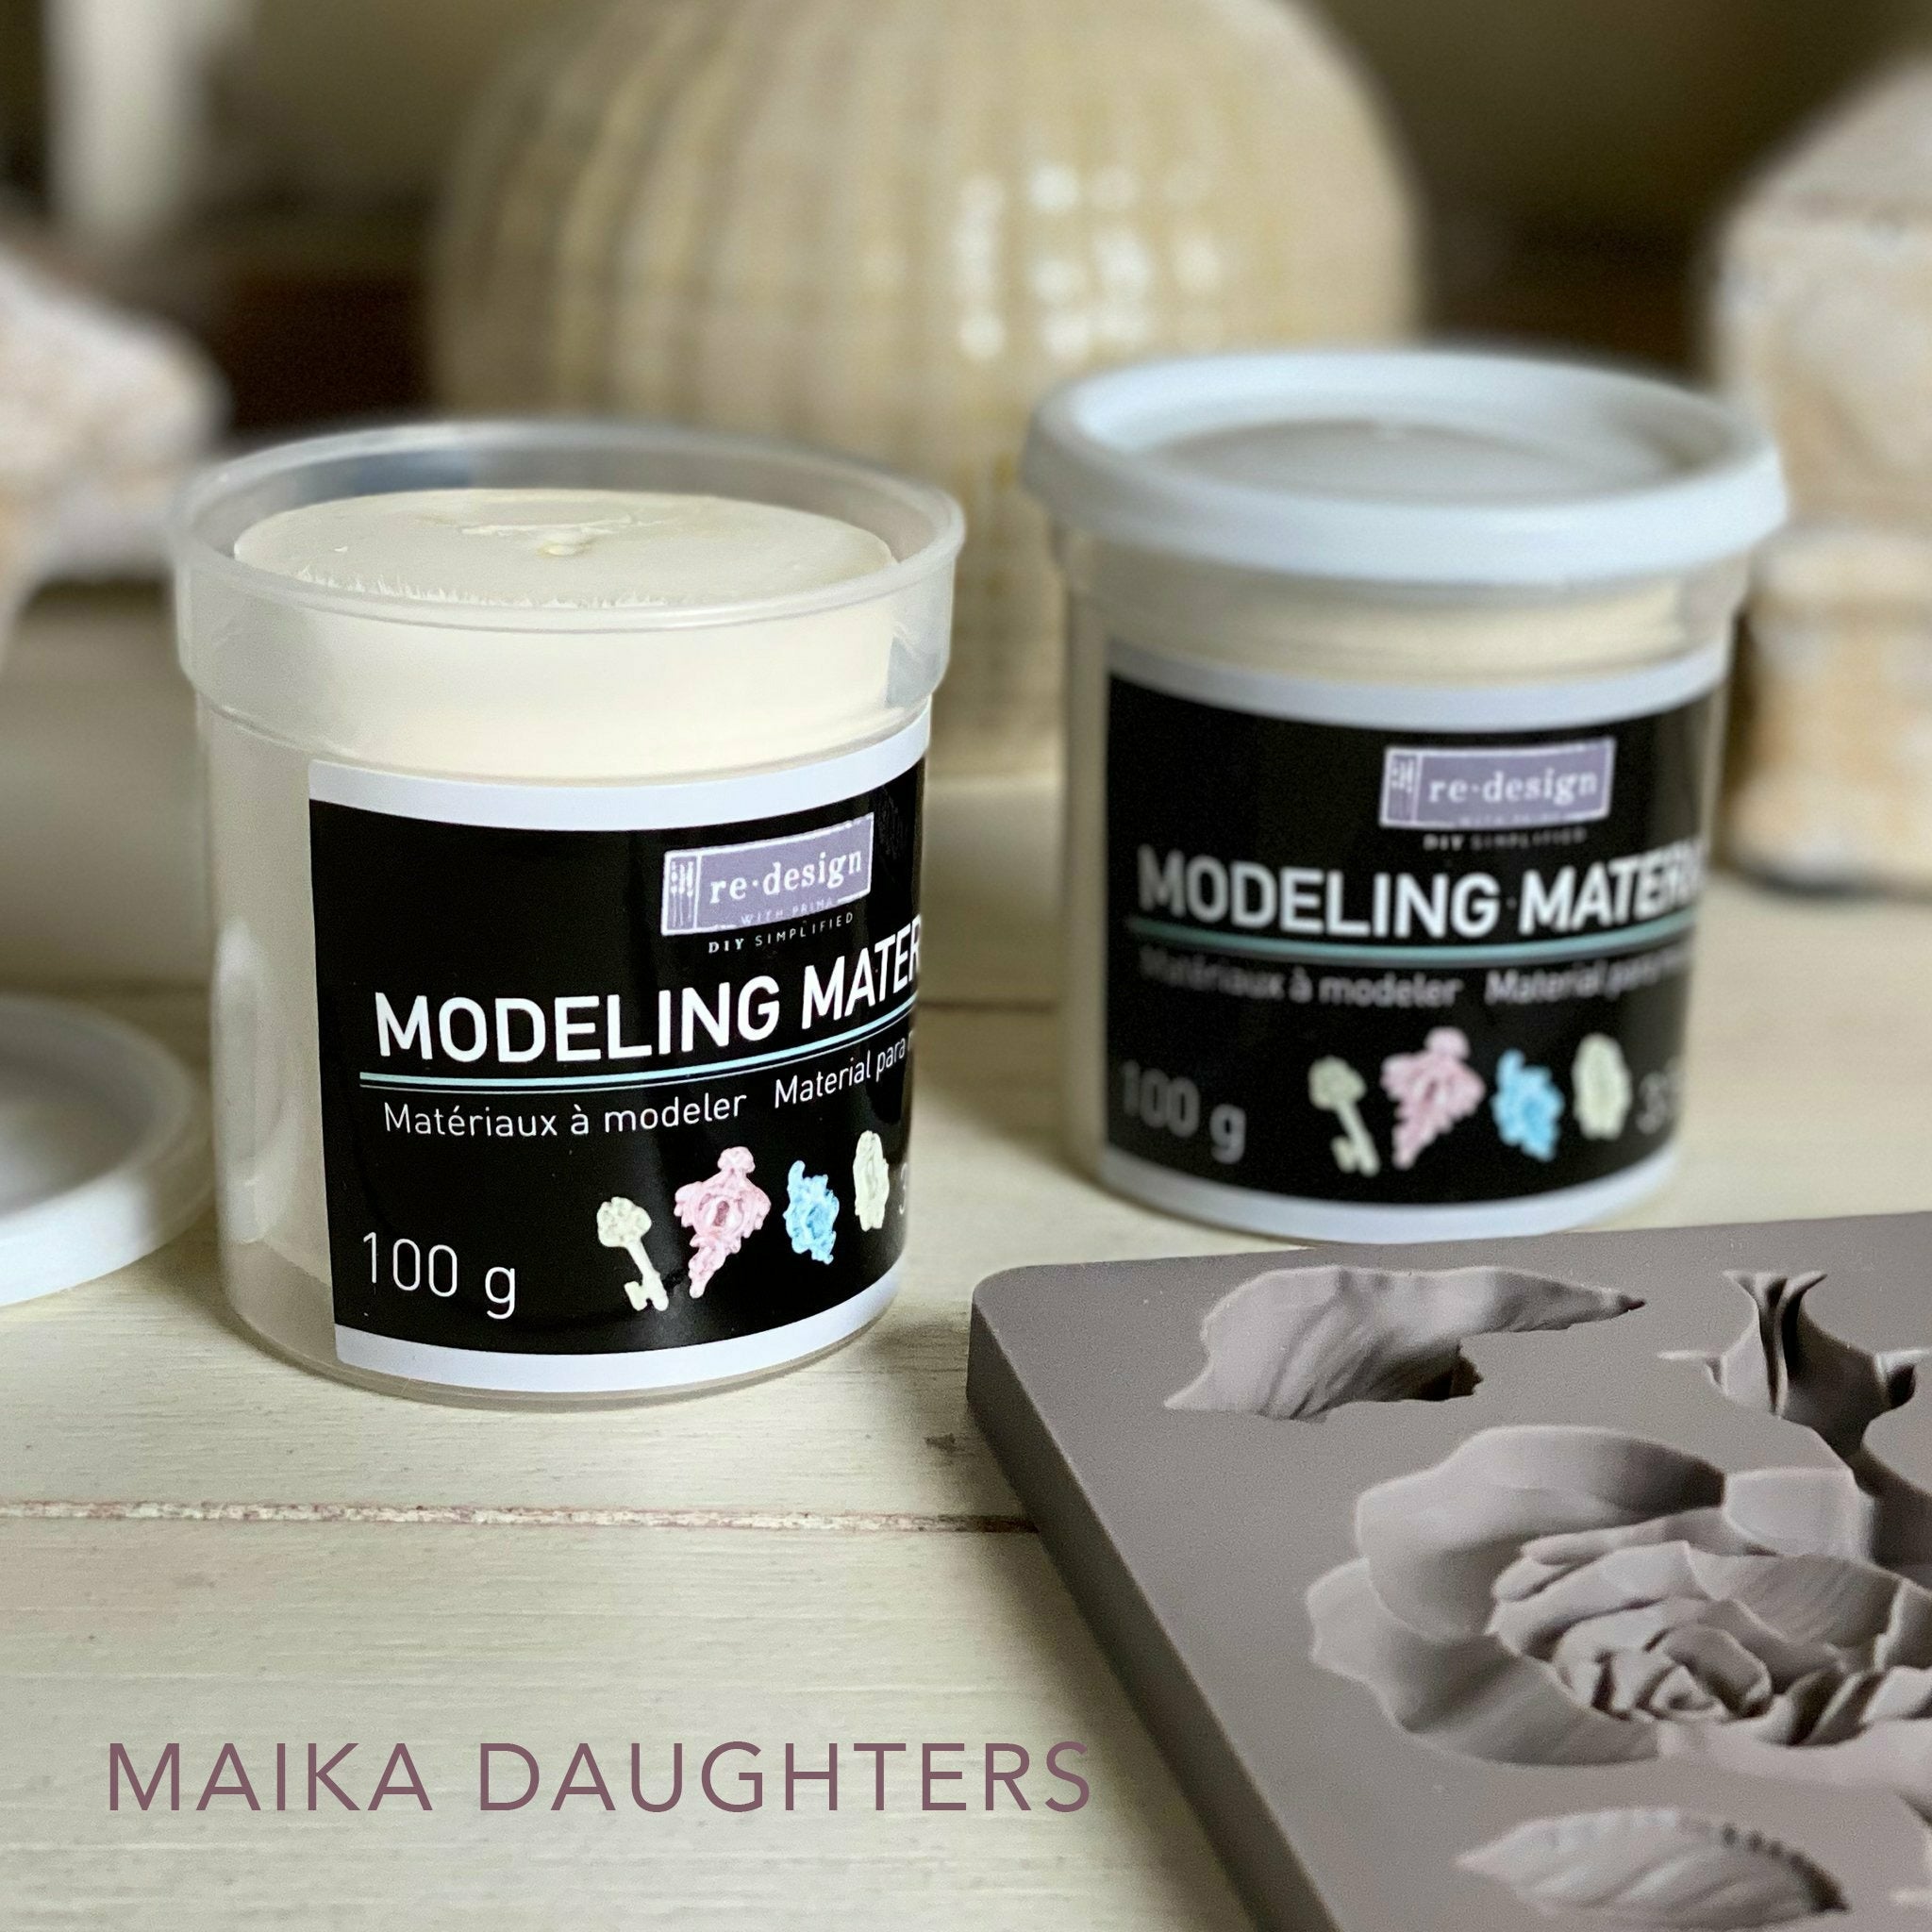 One open and one closed air dry modeling material containers reading: Redesign with prima. Modeling Material. Materiaux a modeler. Material para modelar. 100 g. 3.5 oz. A mauve Maika Daughters logo on the bottom left.